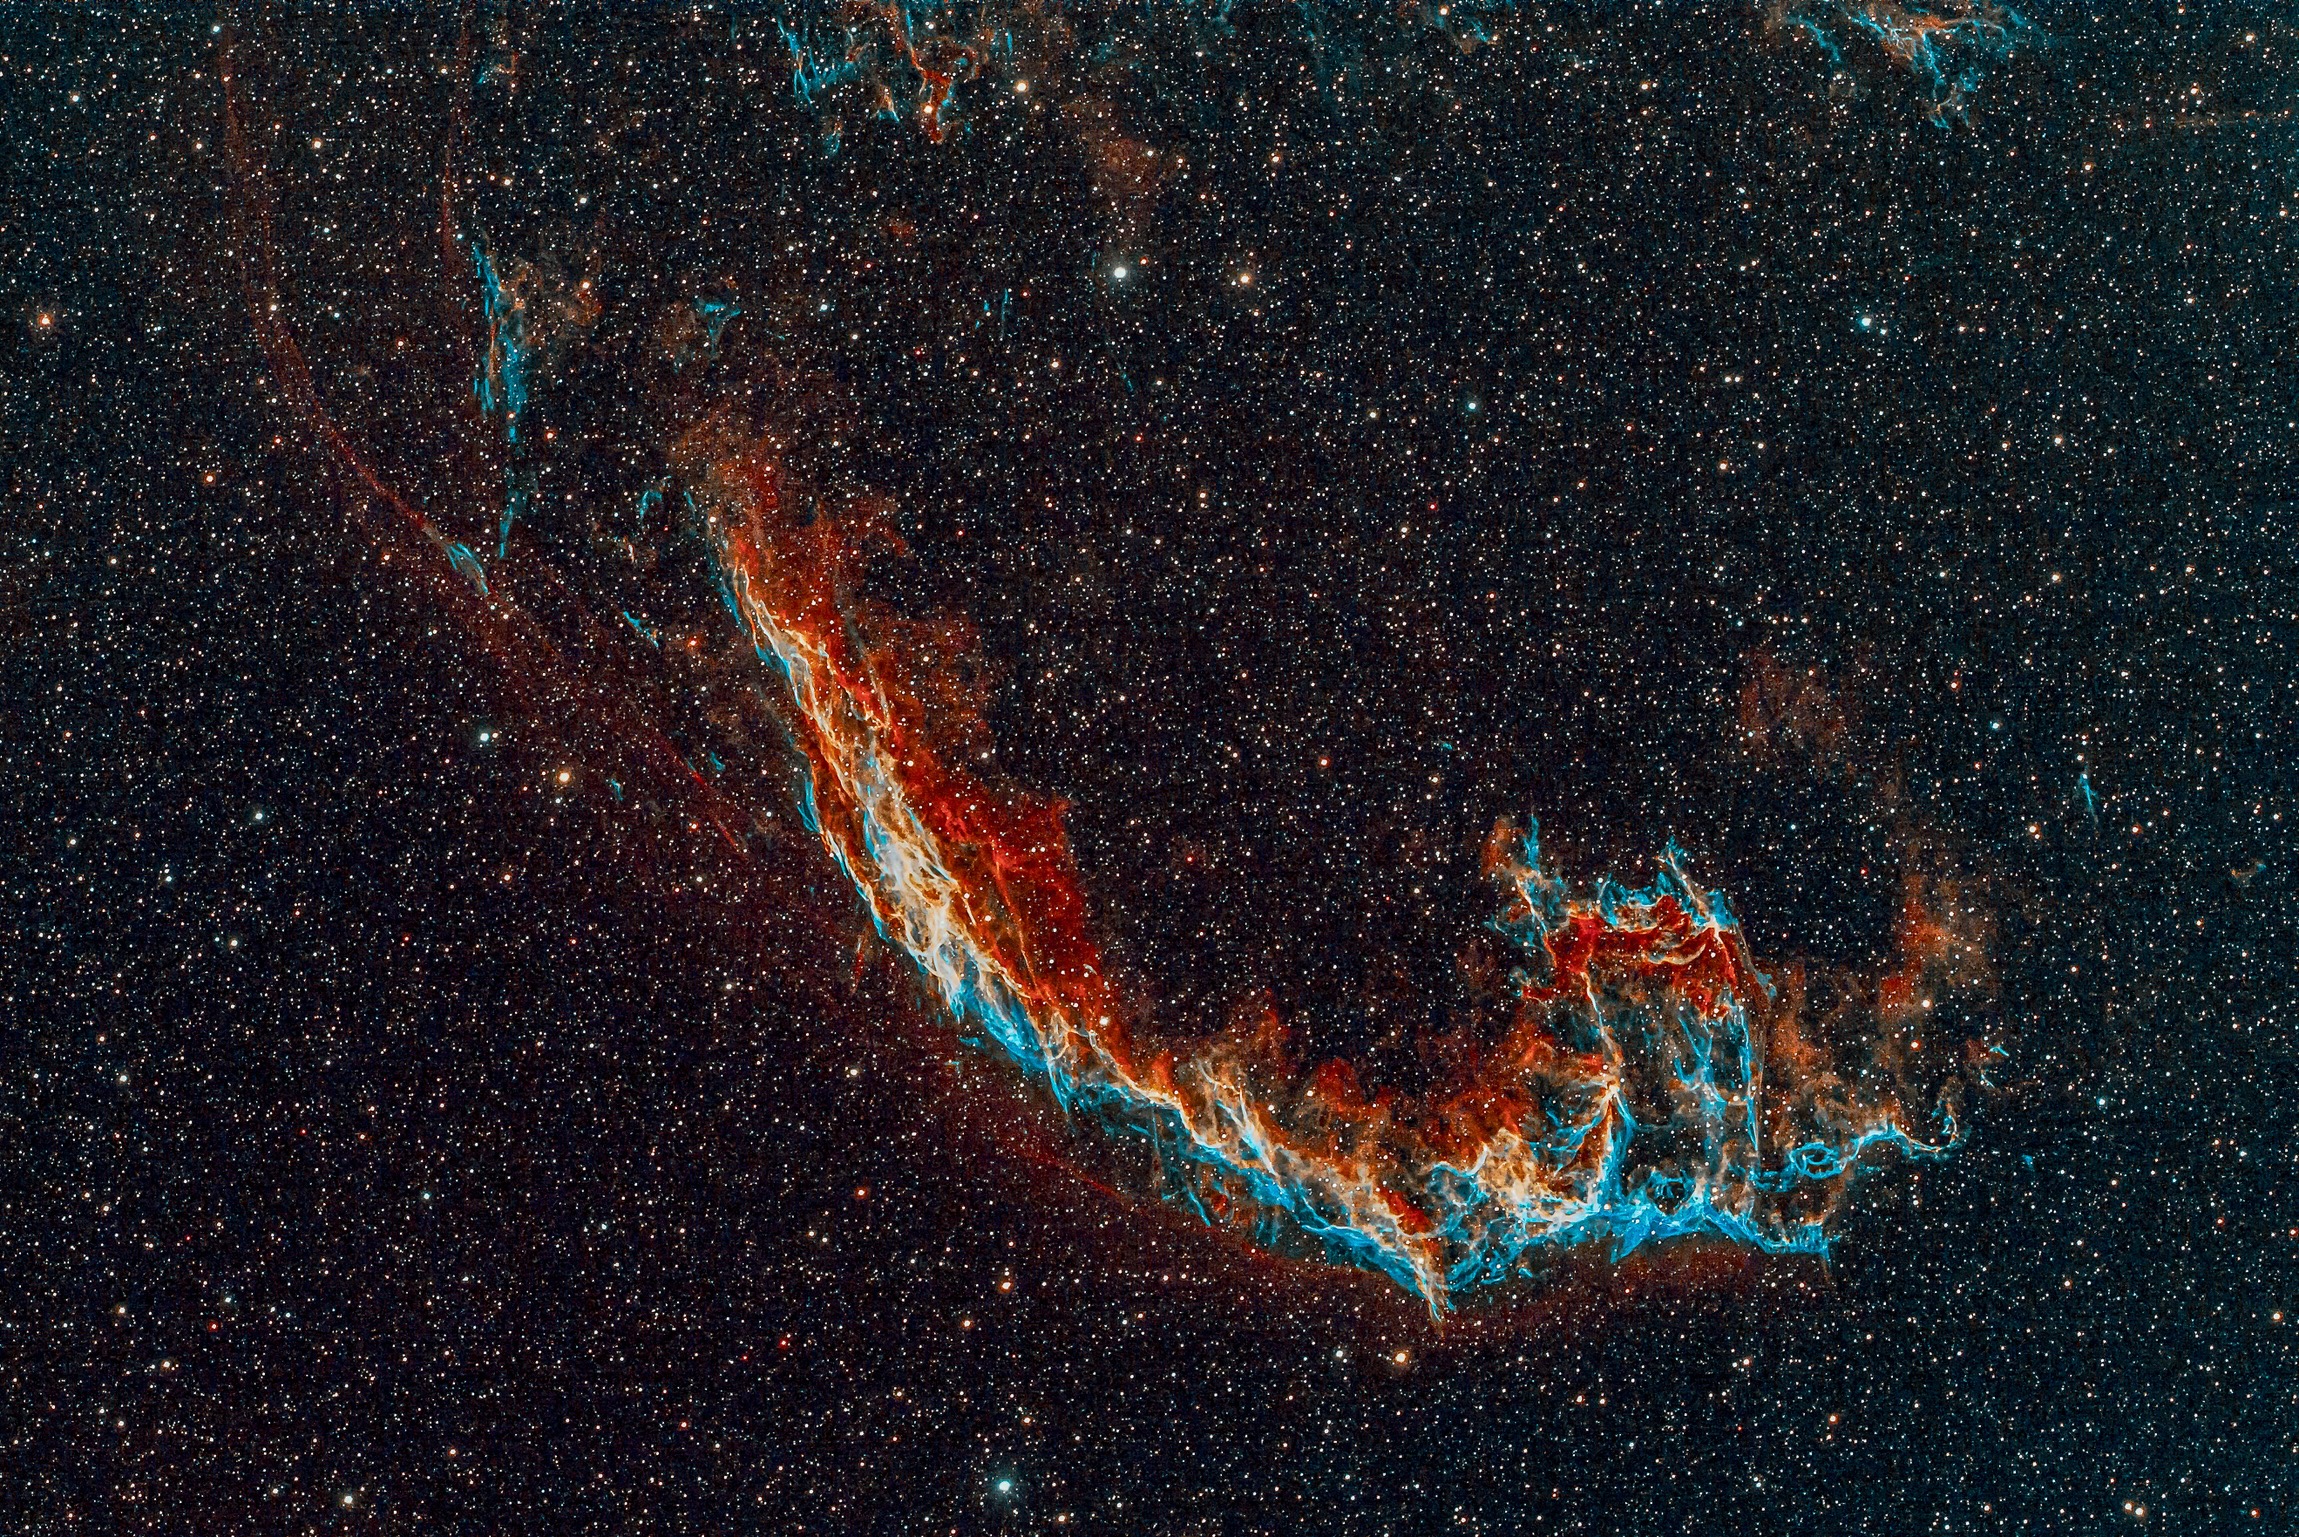 The Eastern Veil Nebula is a large supernova remnant in the constellation Cygnus. It is an expanding cloud created by the death of an exploded star. Scientists believe that the light from this supernova explosion reached Earth about 5000 years ago.